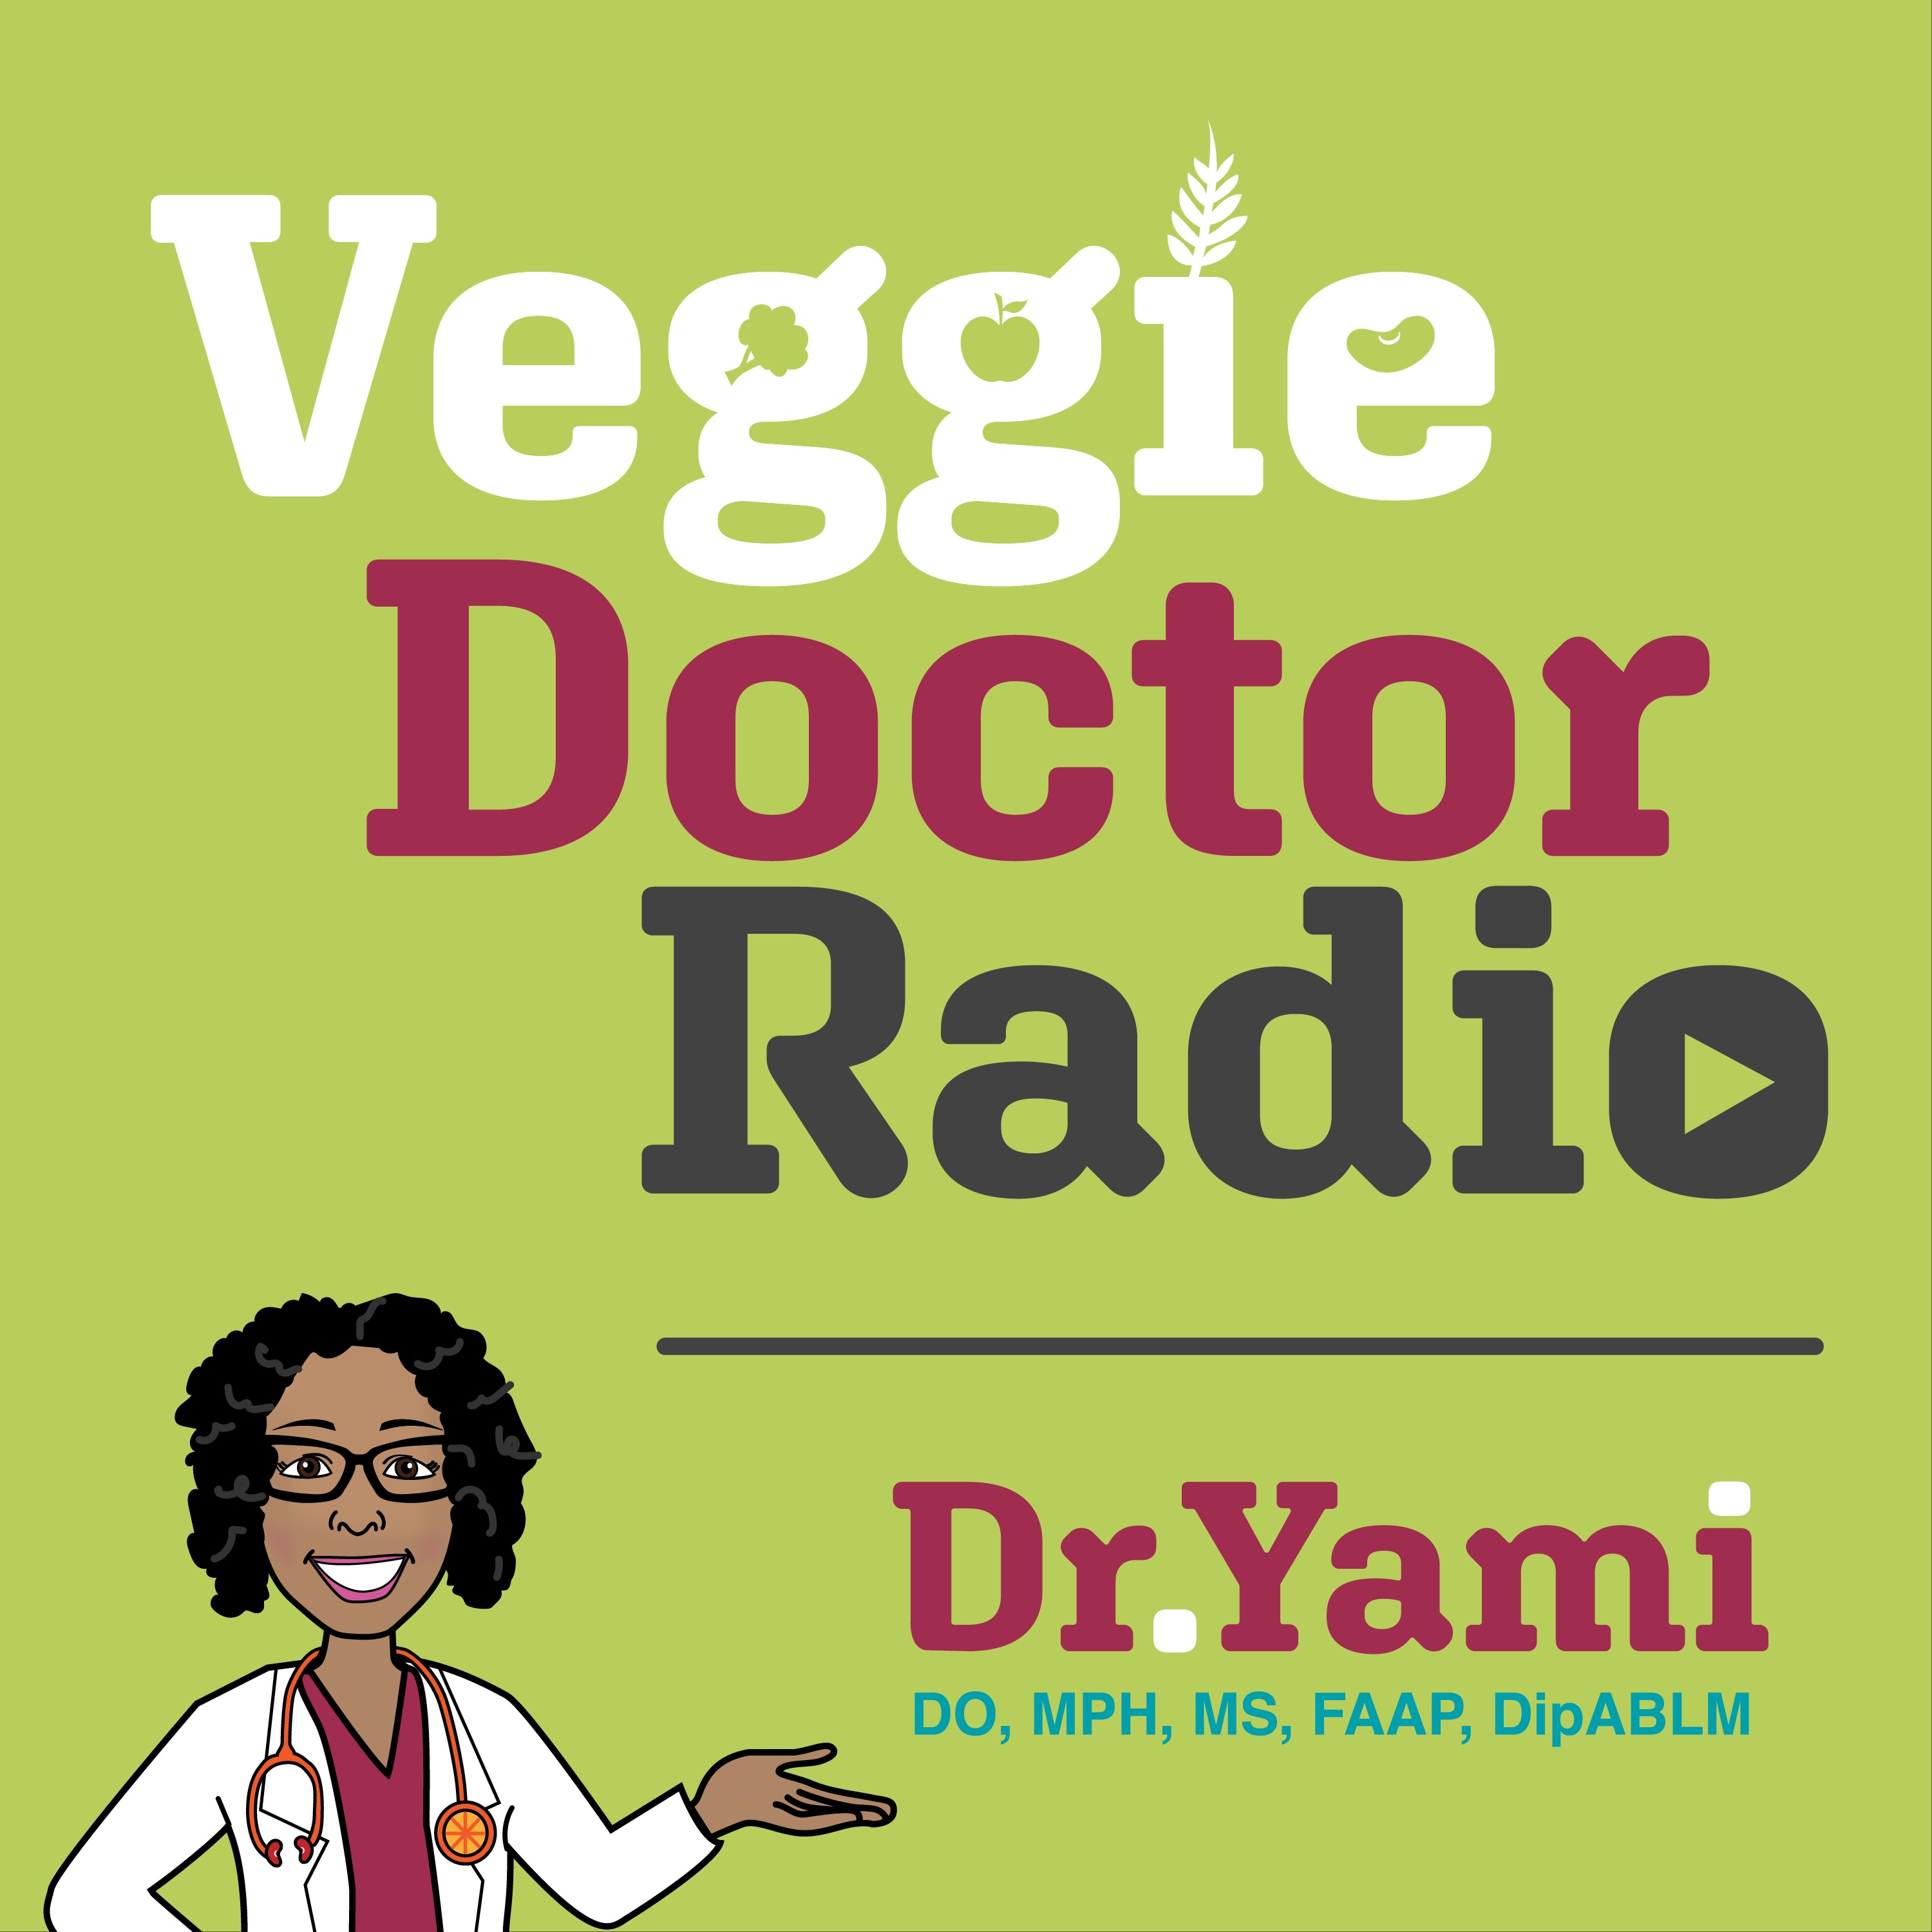 251: How to go from sober curious to sober-minded with Jenn Kautsch (Veggie Doctor Radio)